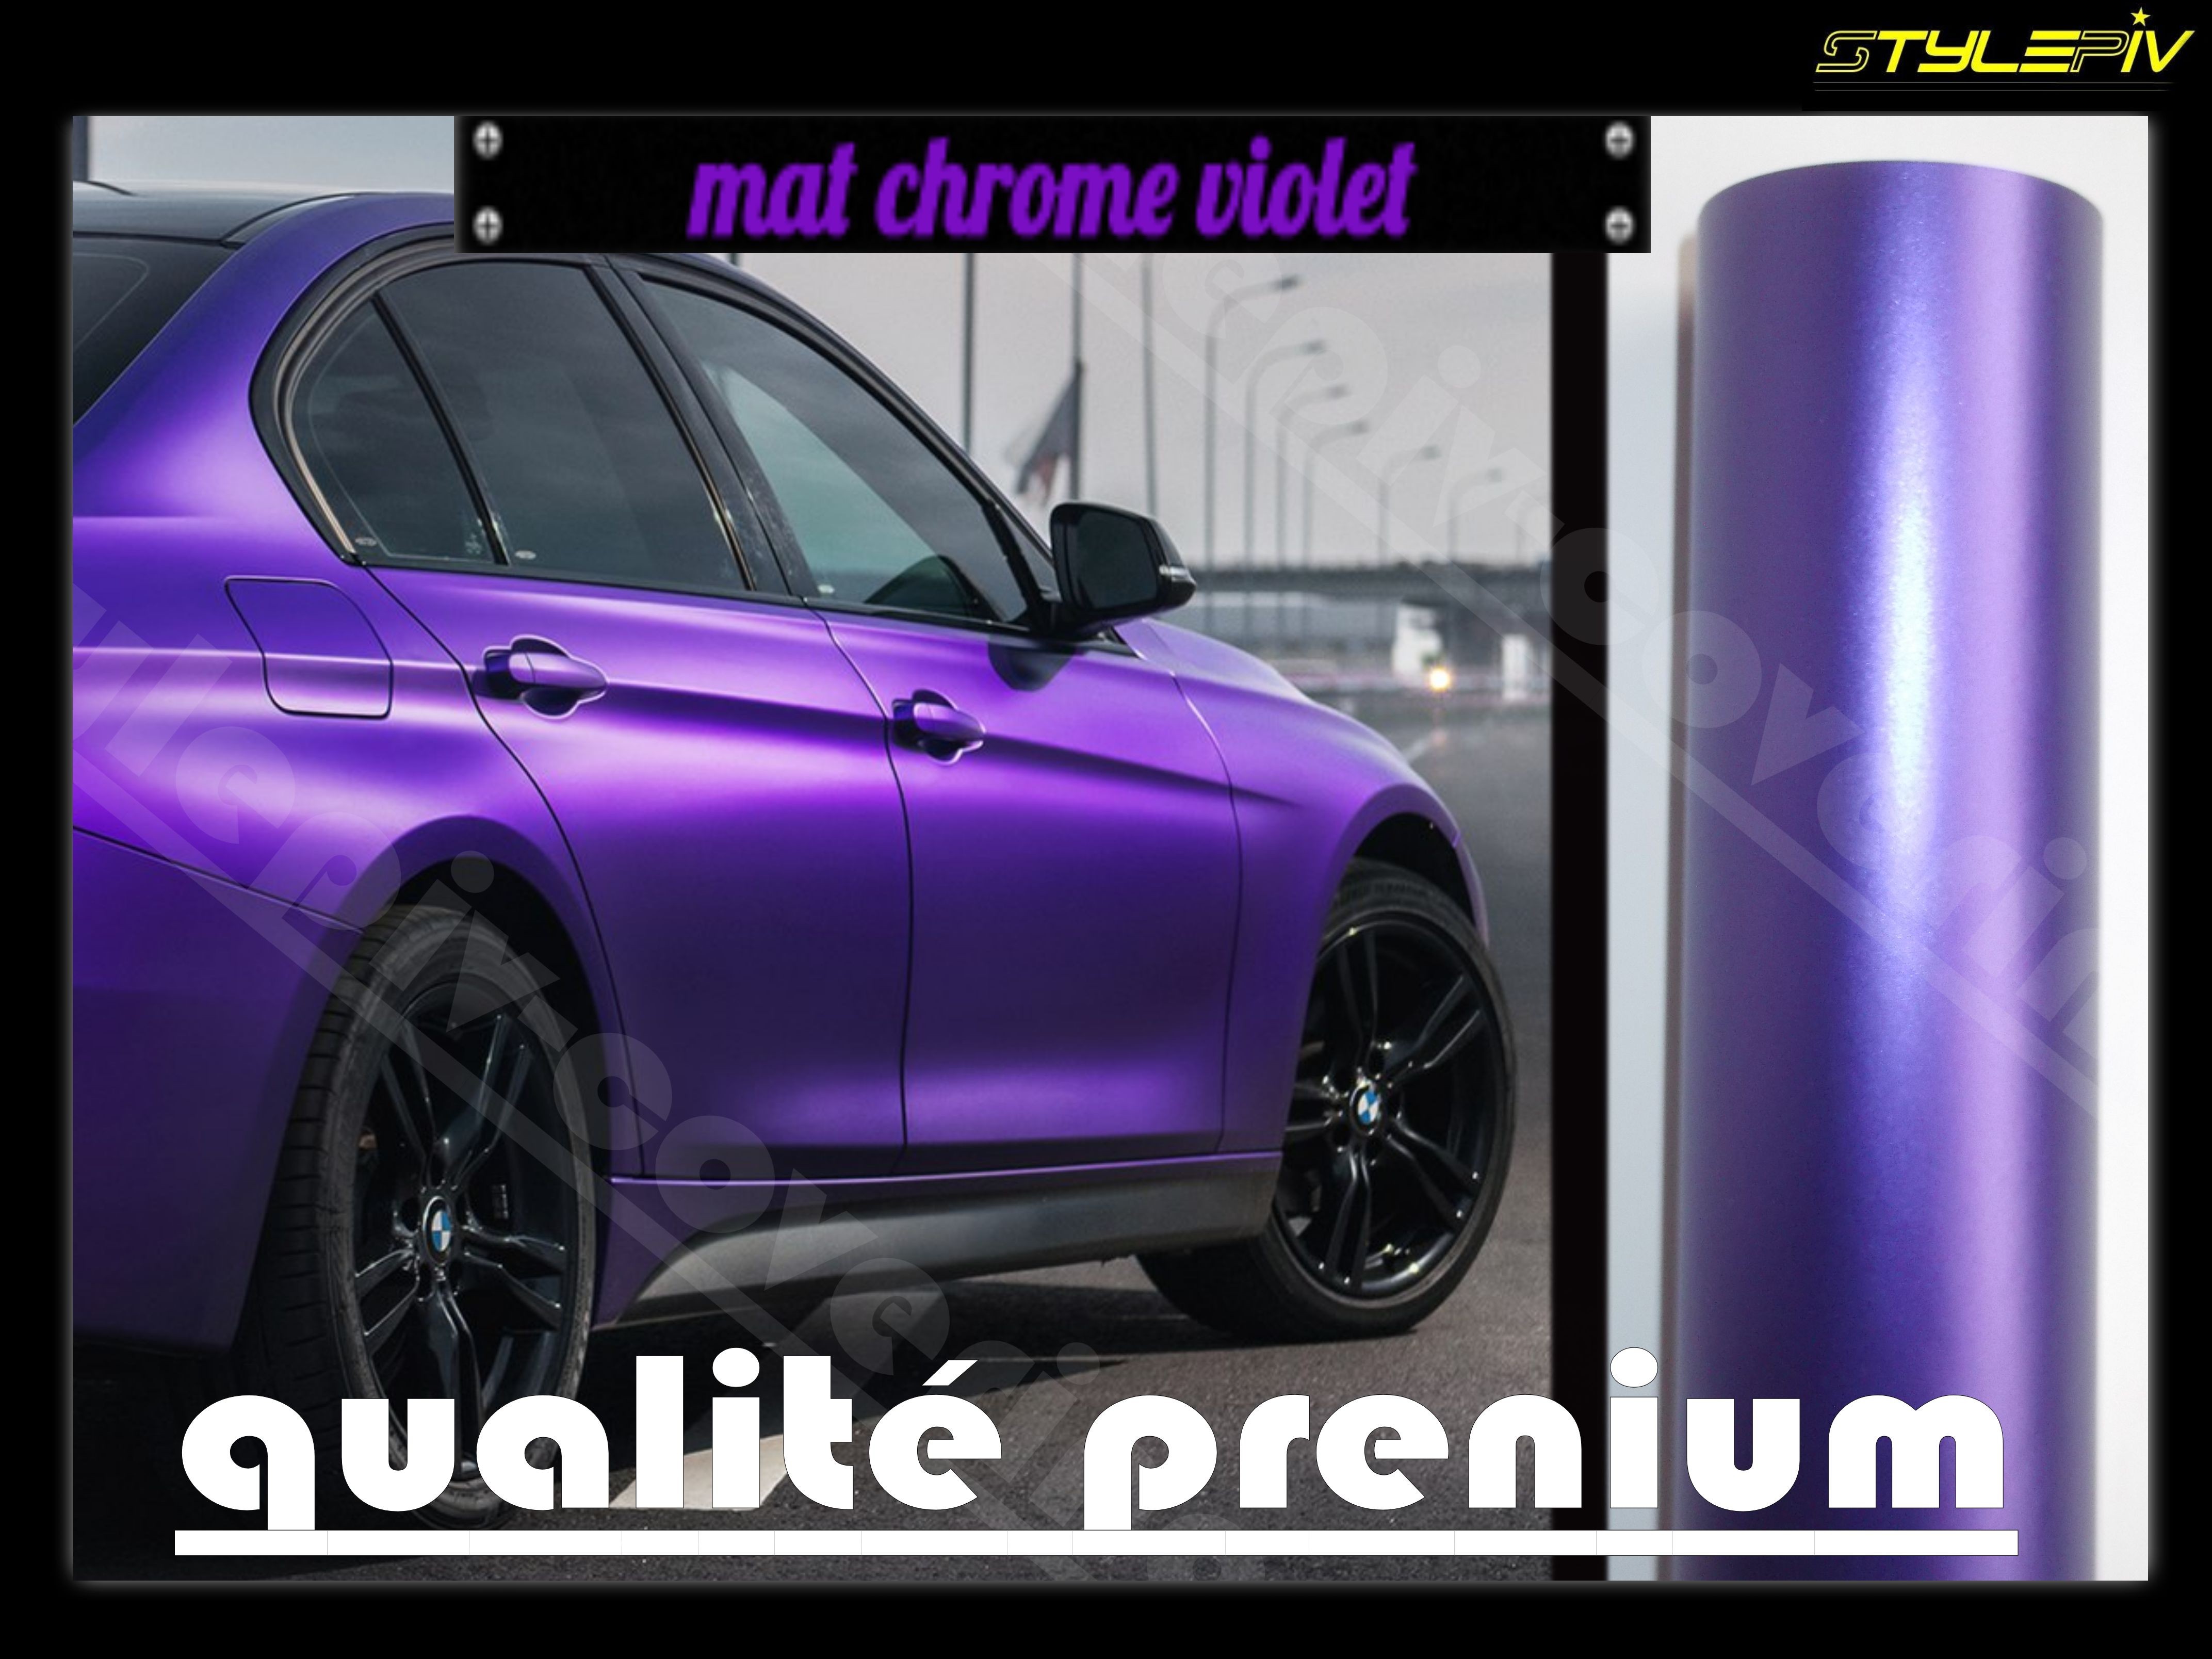  film covering violet mat chrome adhésif thermoformable